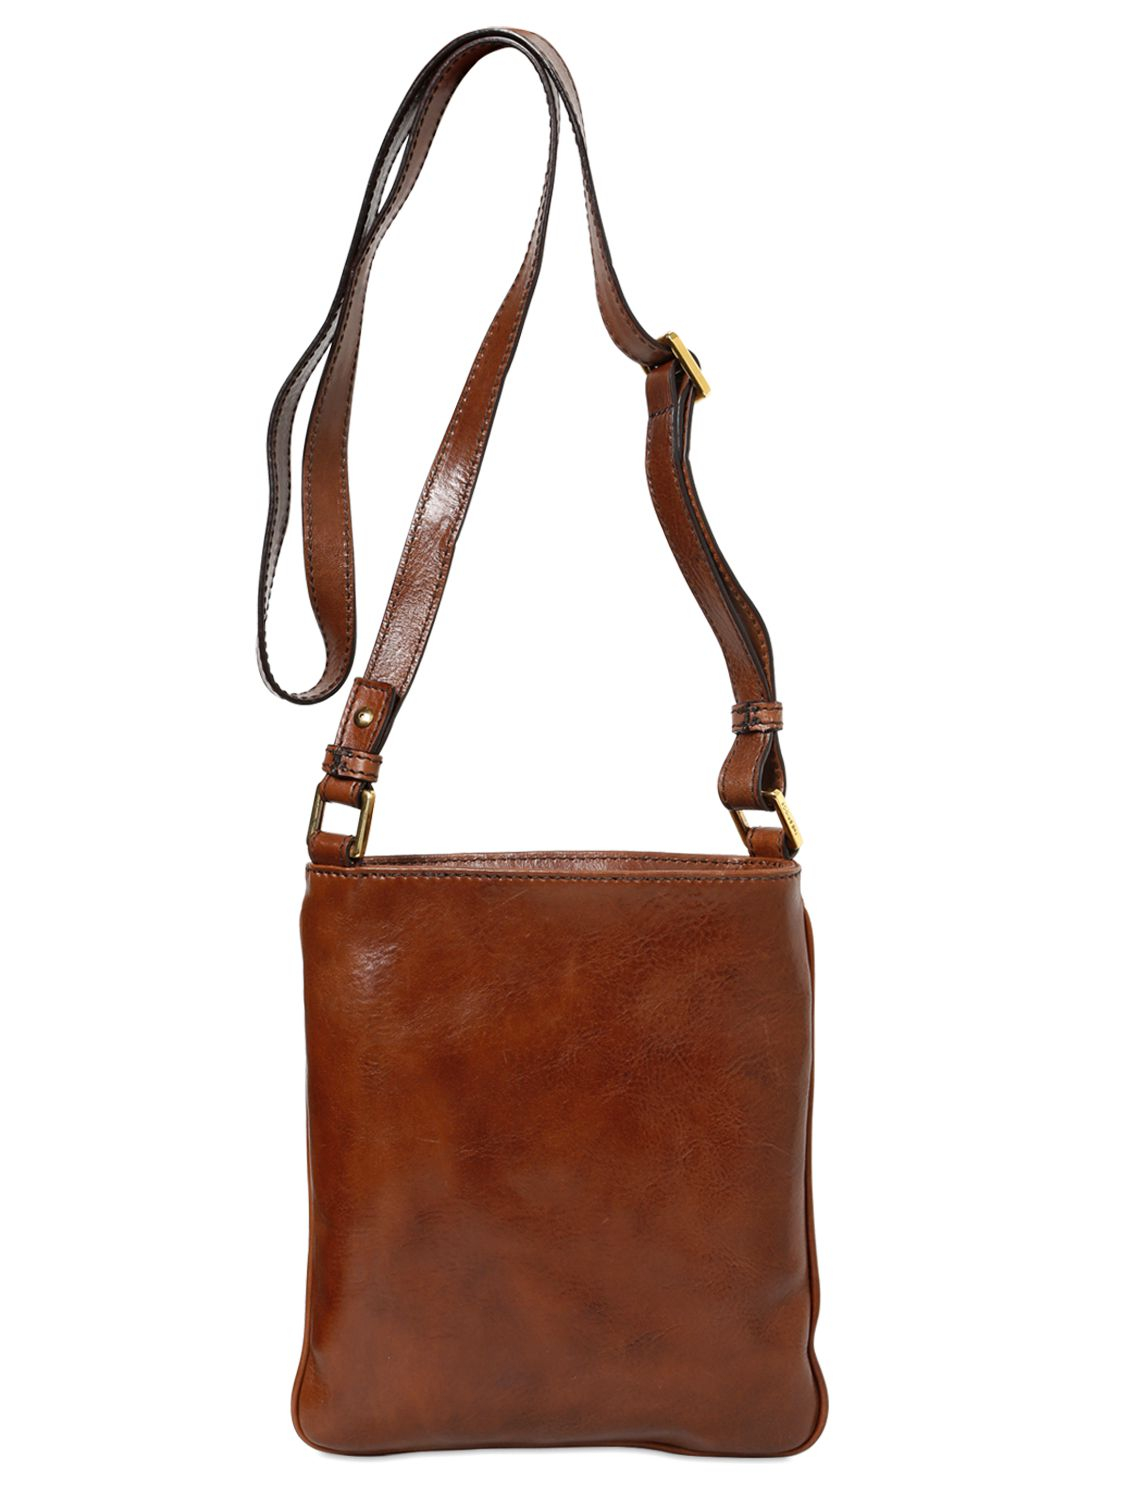 Lyst - The bridge Hand-Painted Leather Crossbody Bag in Brown for Men